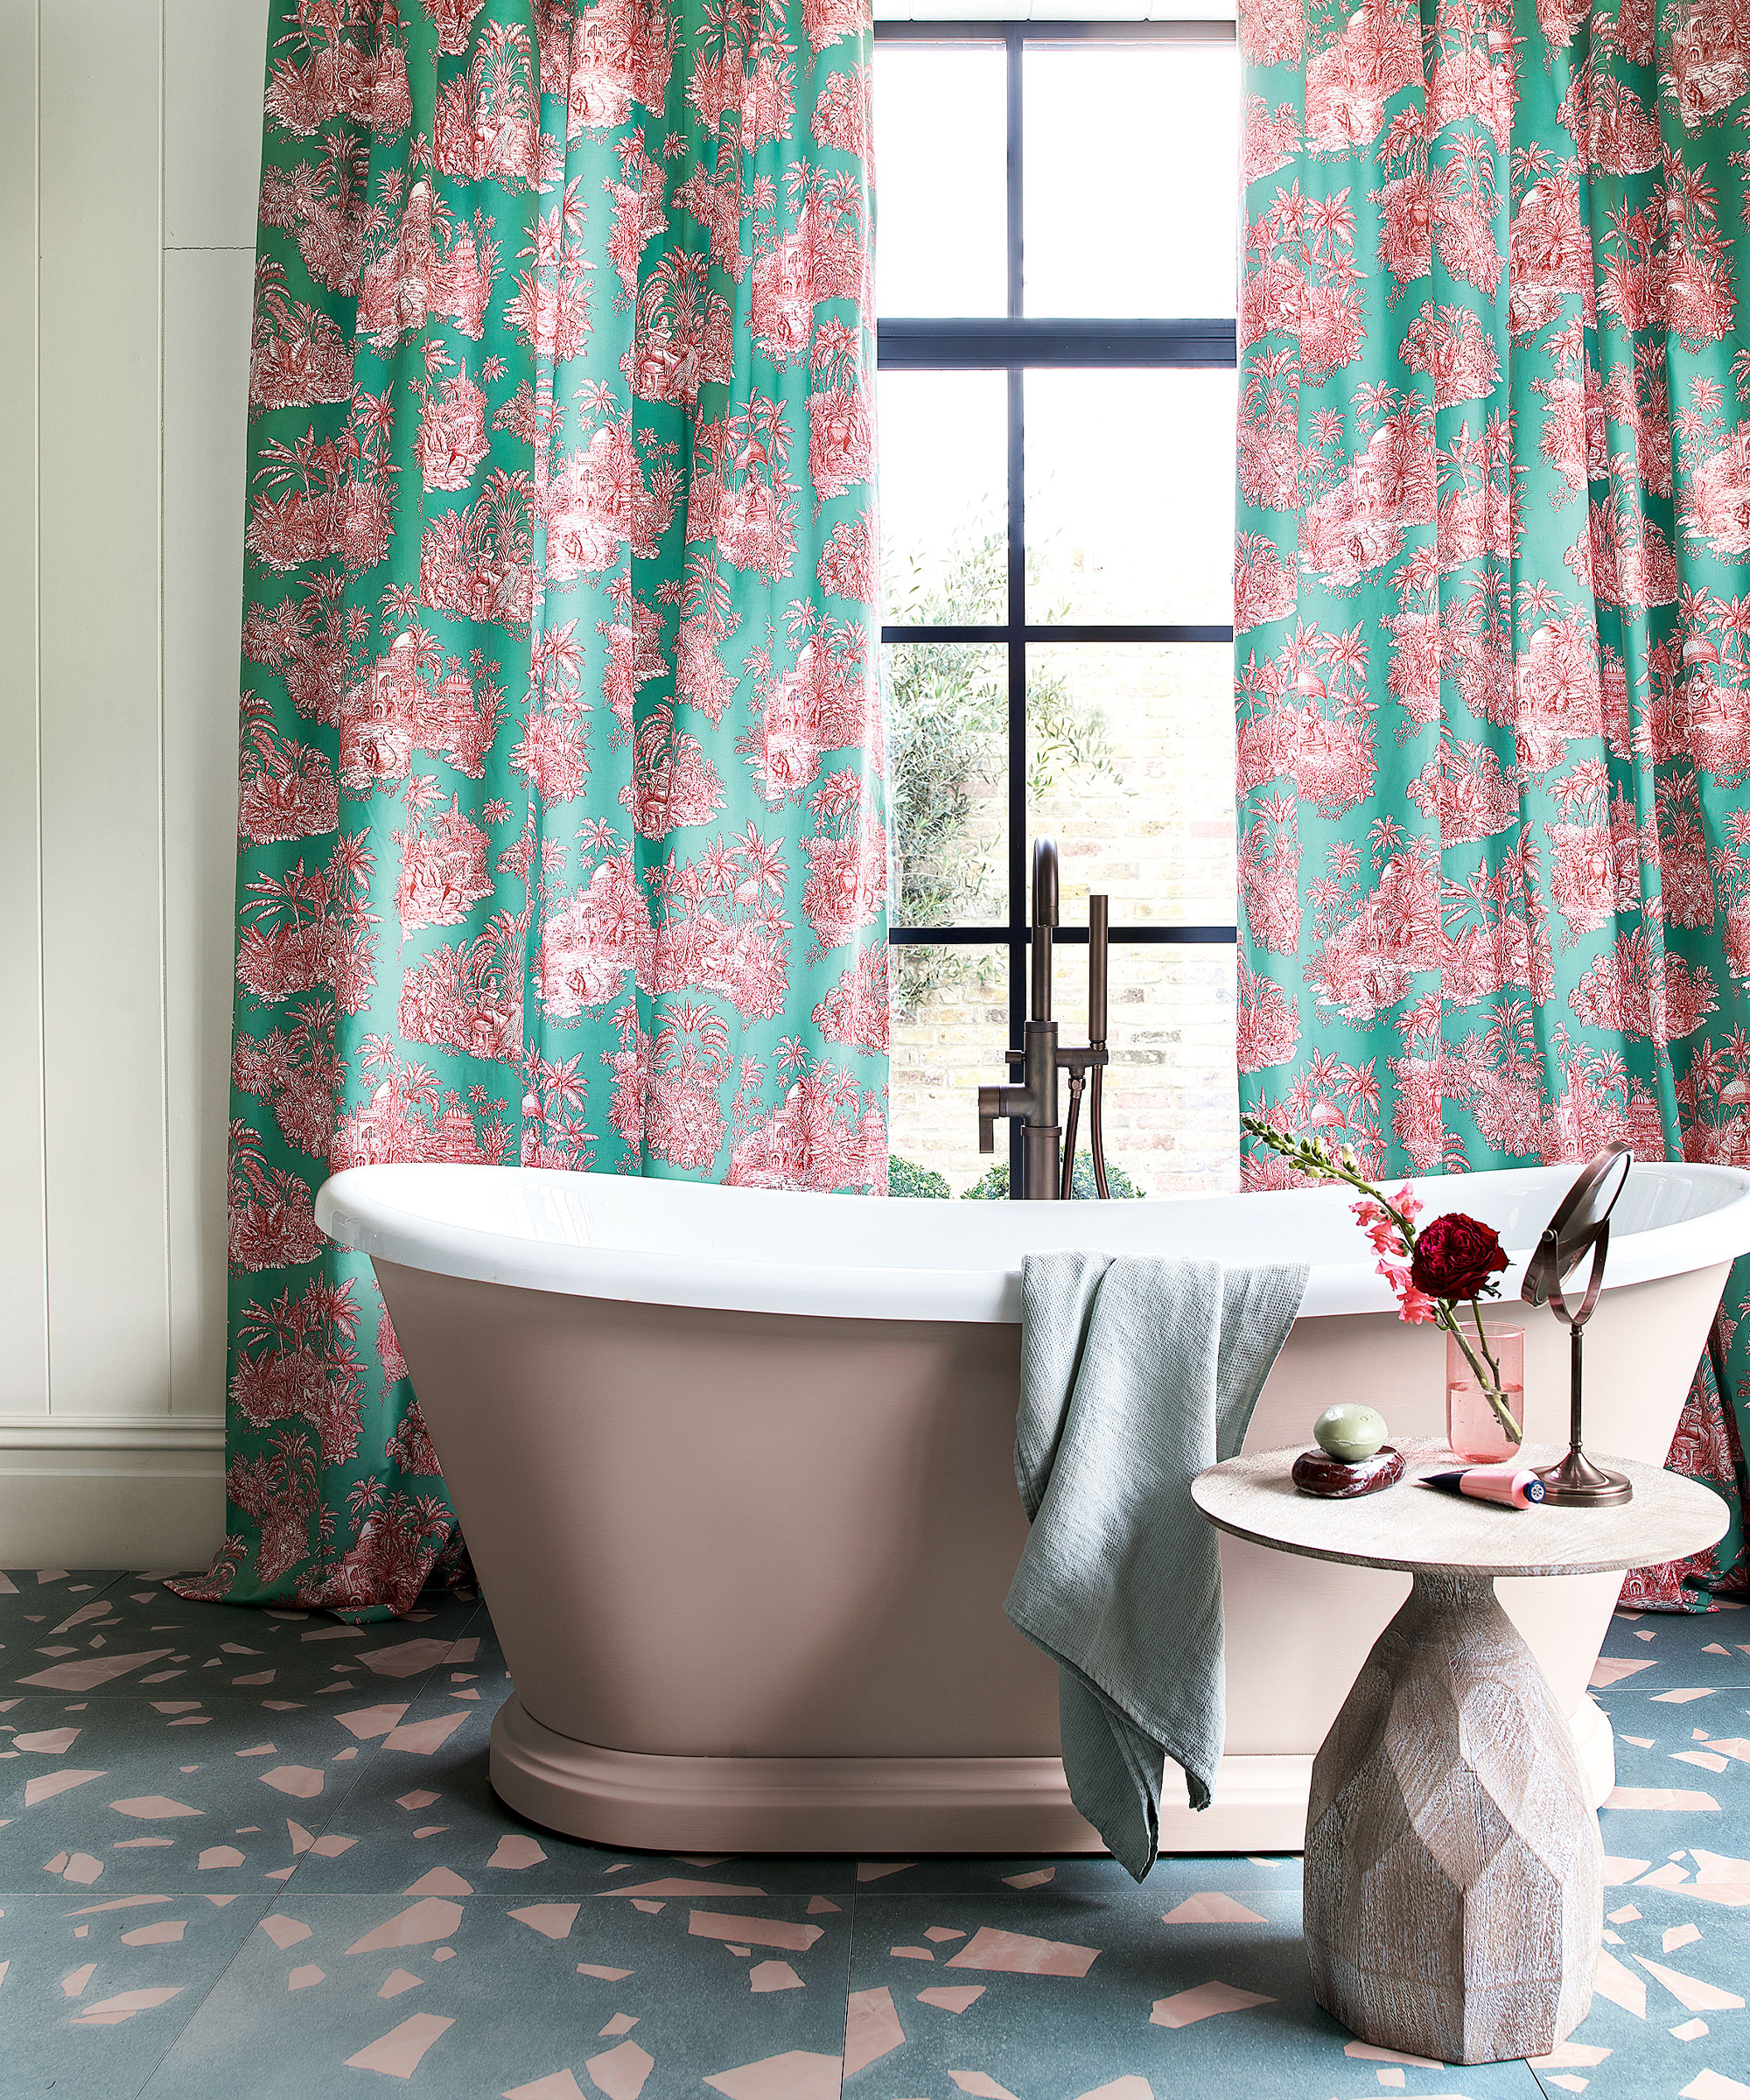 Bathroom space with pink and blue scheme, pink and blue terrazzo flooring, pink and white bathtub, pink and blue floral curtains, rounded, stone side table